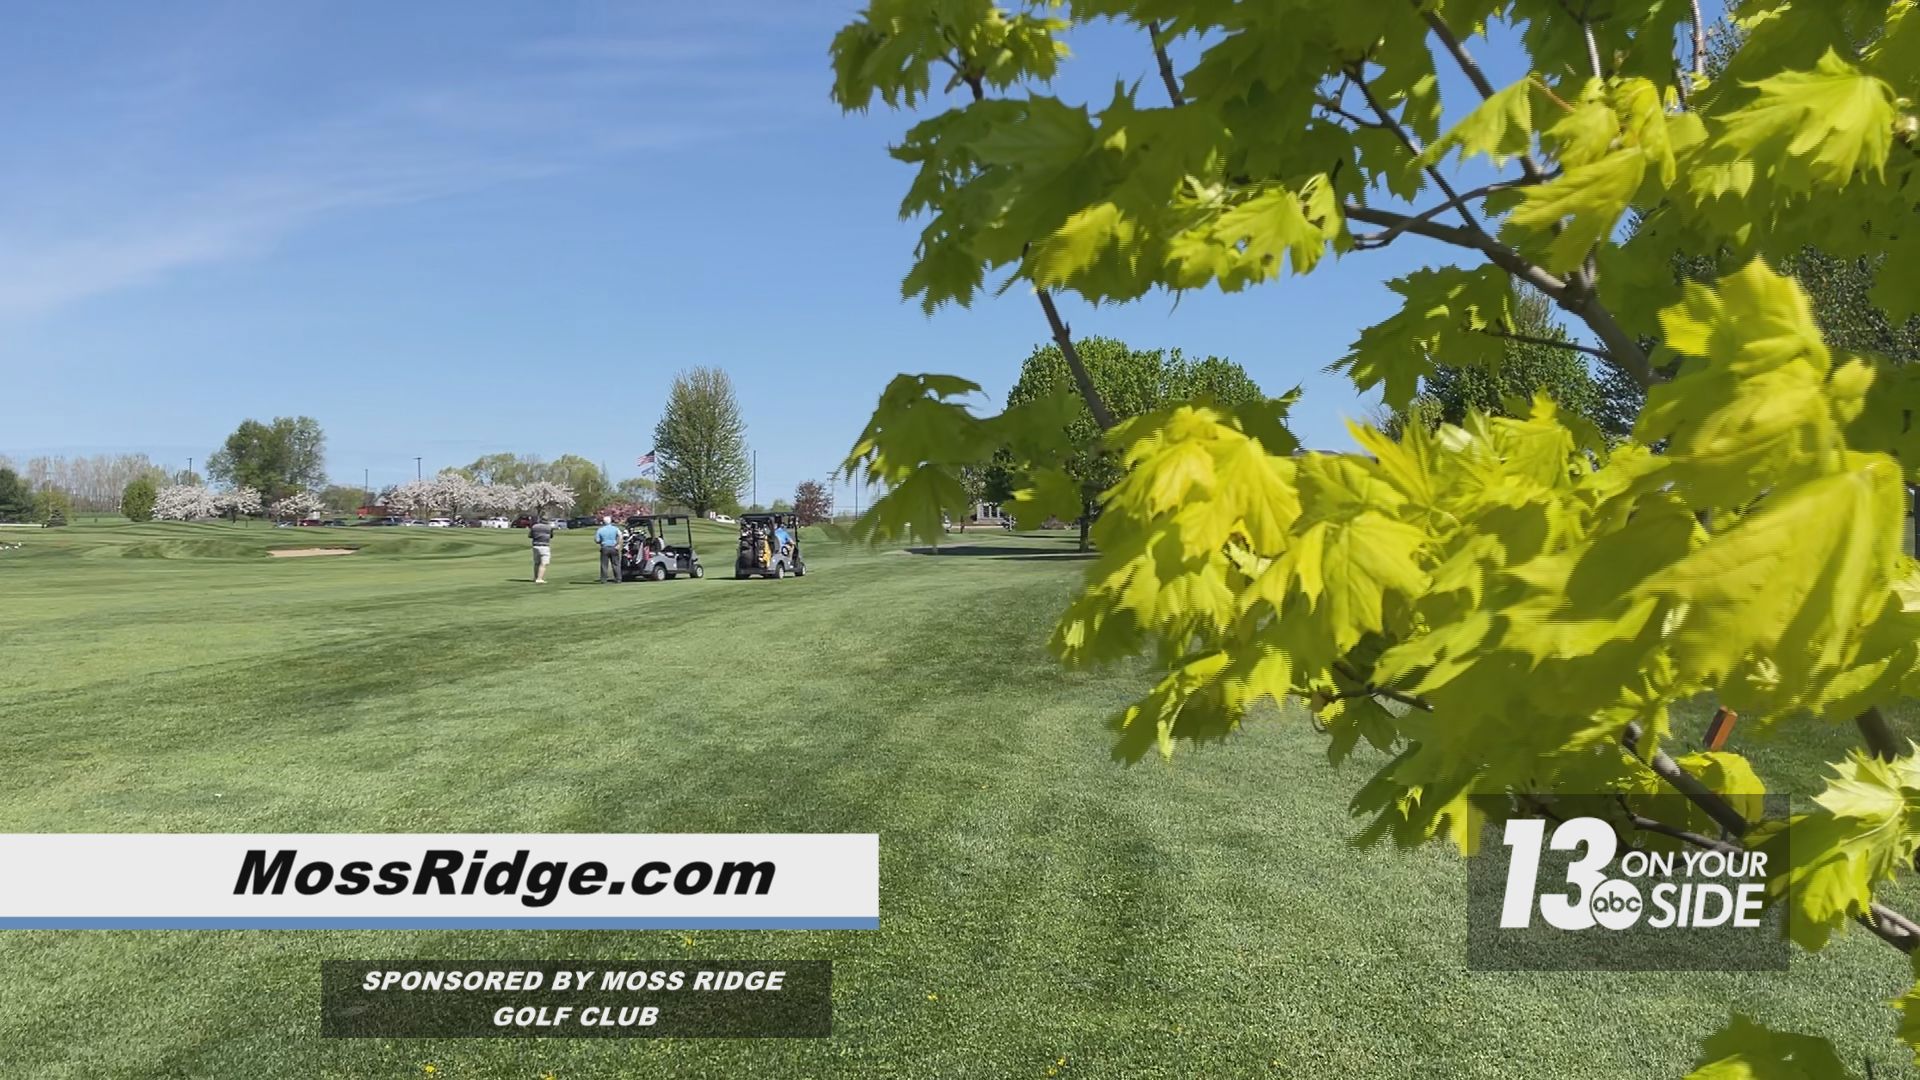 Moss Ridge Golf Club in Ravenna promises a scenic and challenging golf experience.